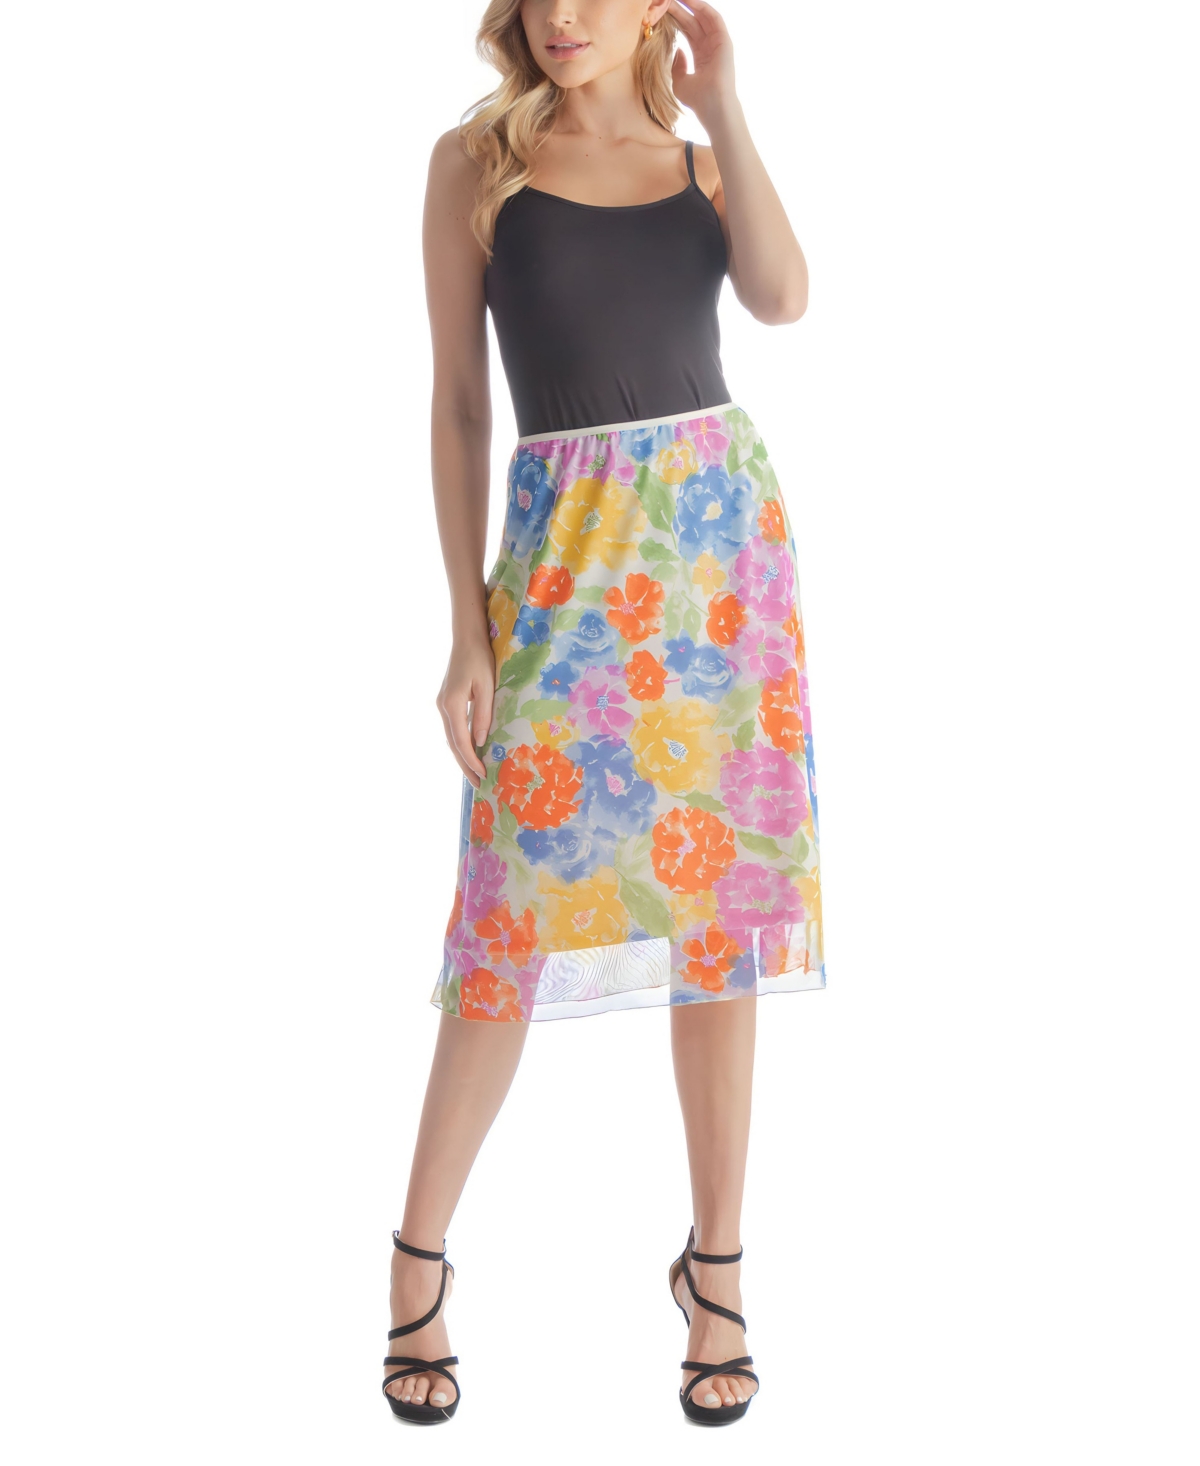 24seven Comfort Apparel Plus Size Colorful Elastic Waist Skirt In Pink Multi